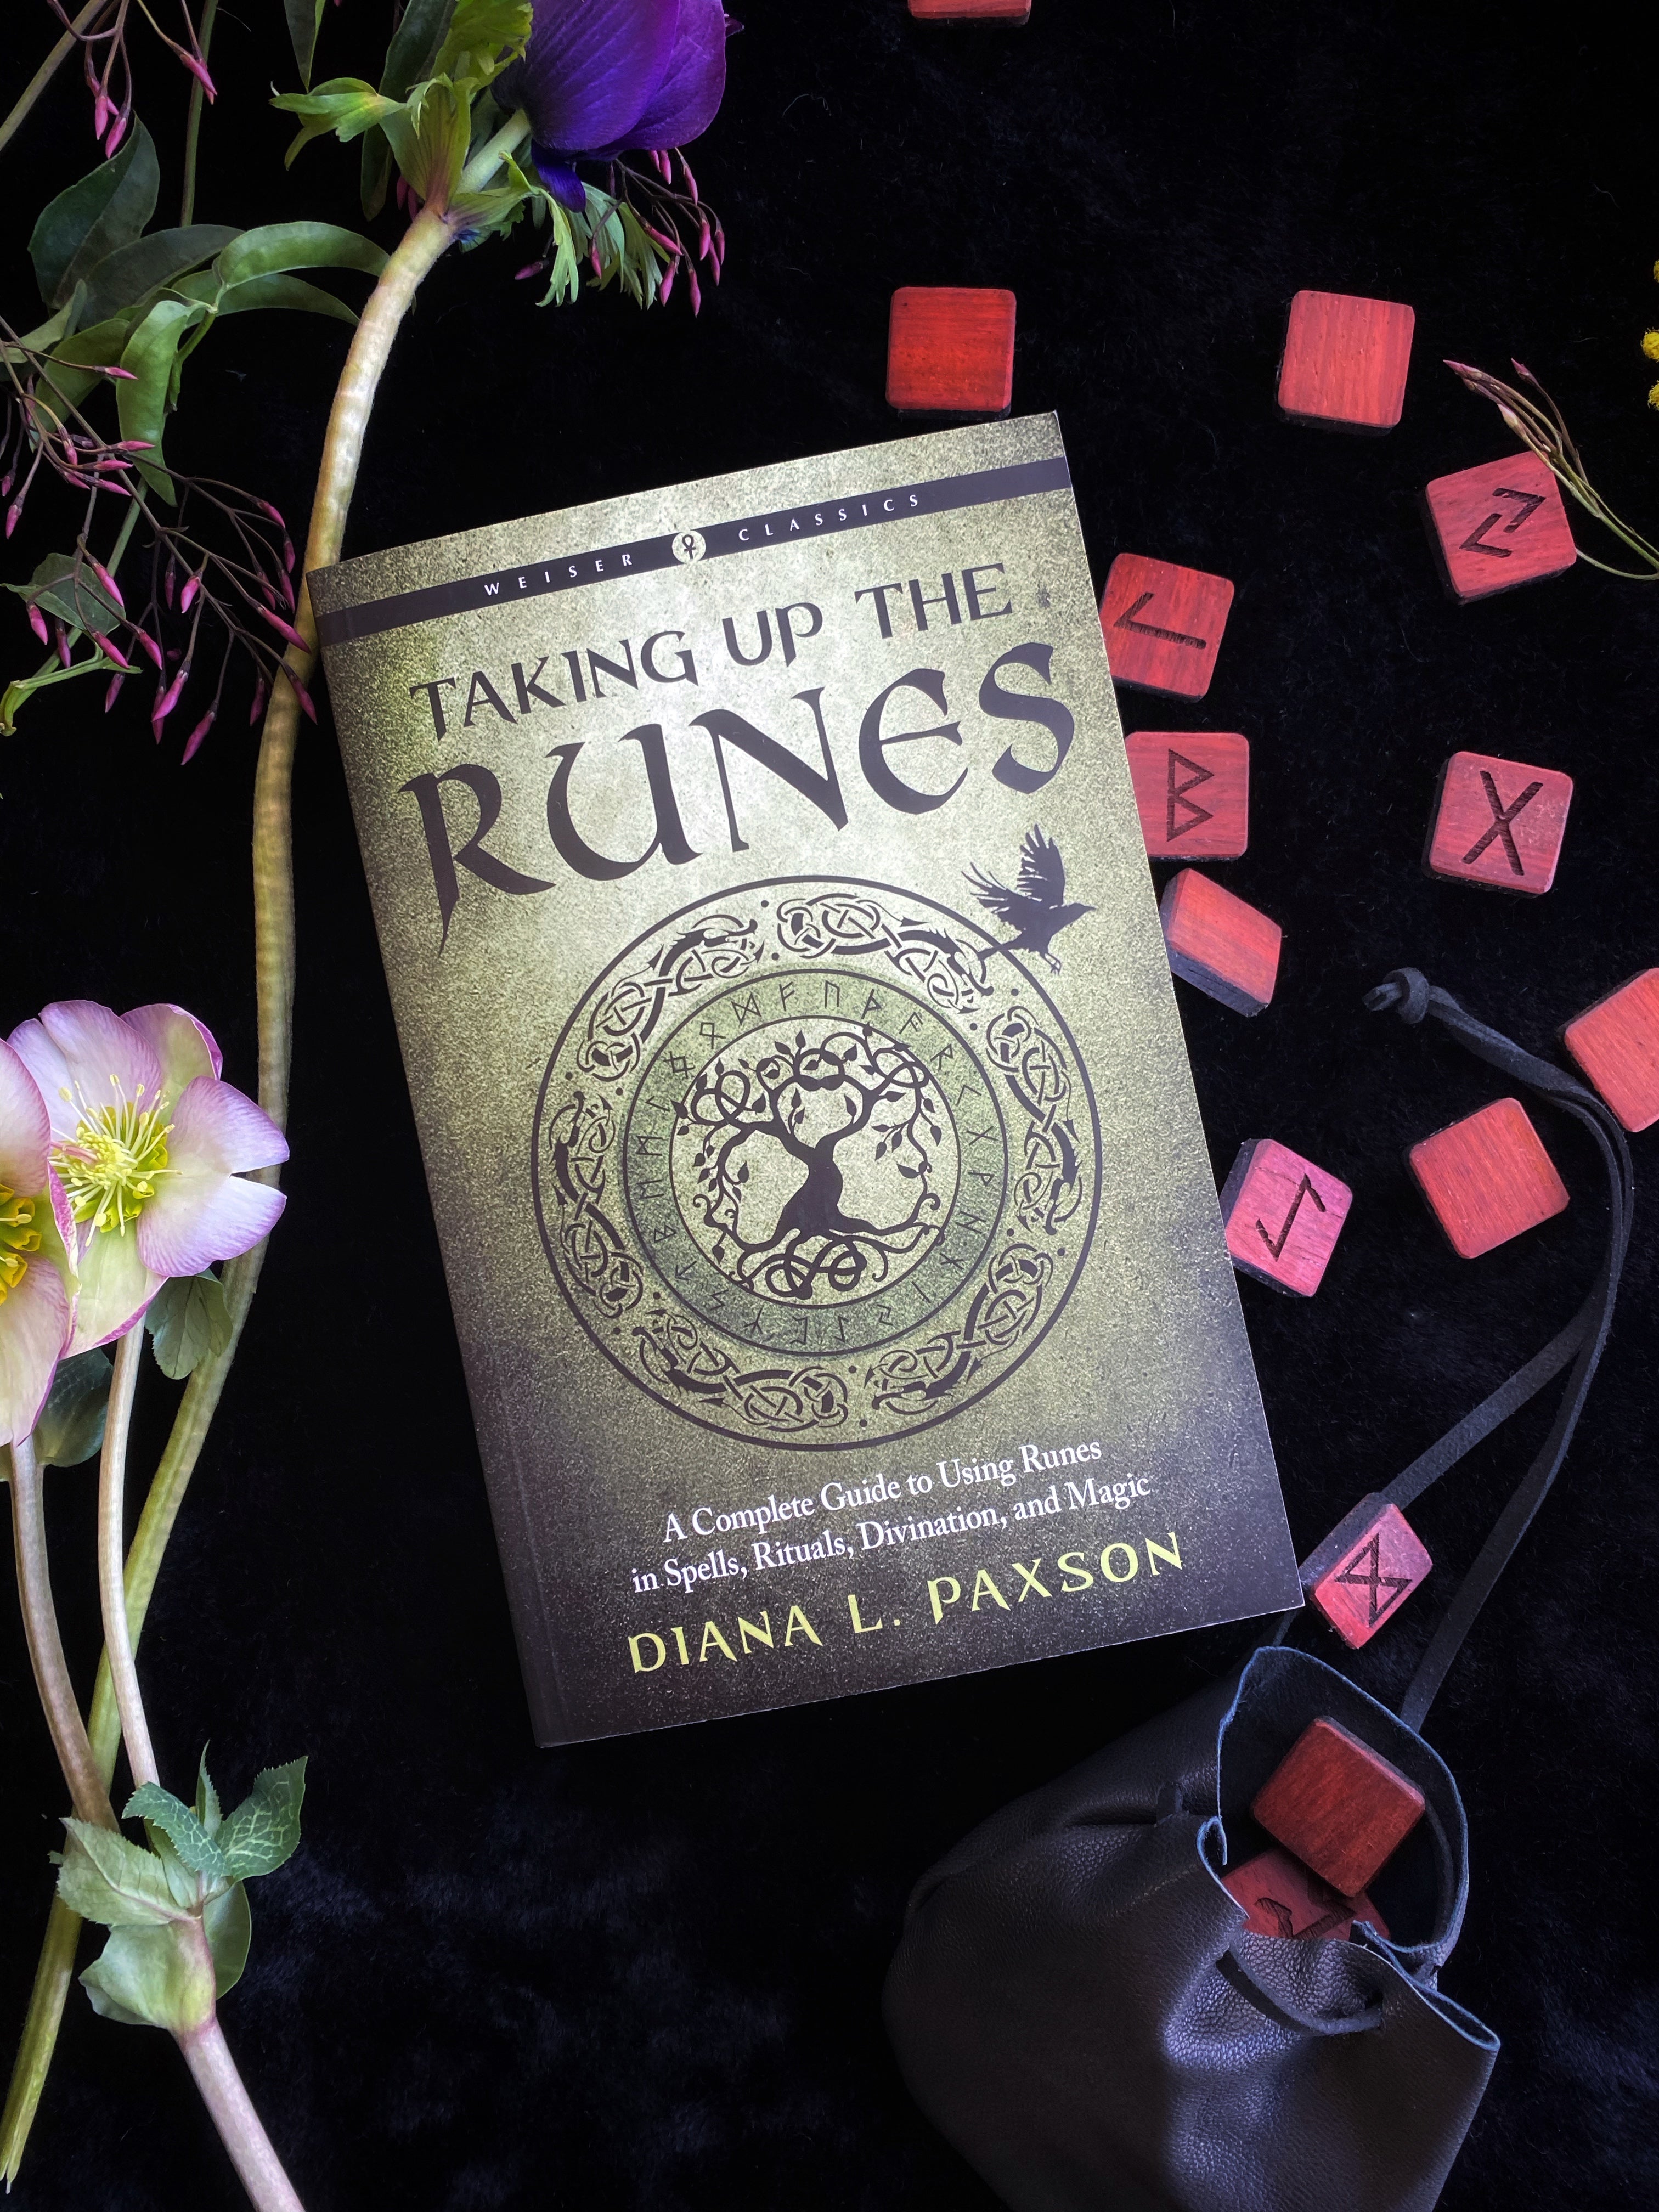 Taking Up the Runes: A complete Guide to Using Runes in Spells, Ritual, Divination, and Magic